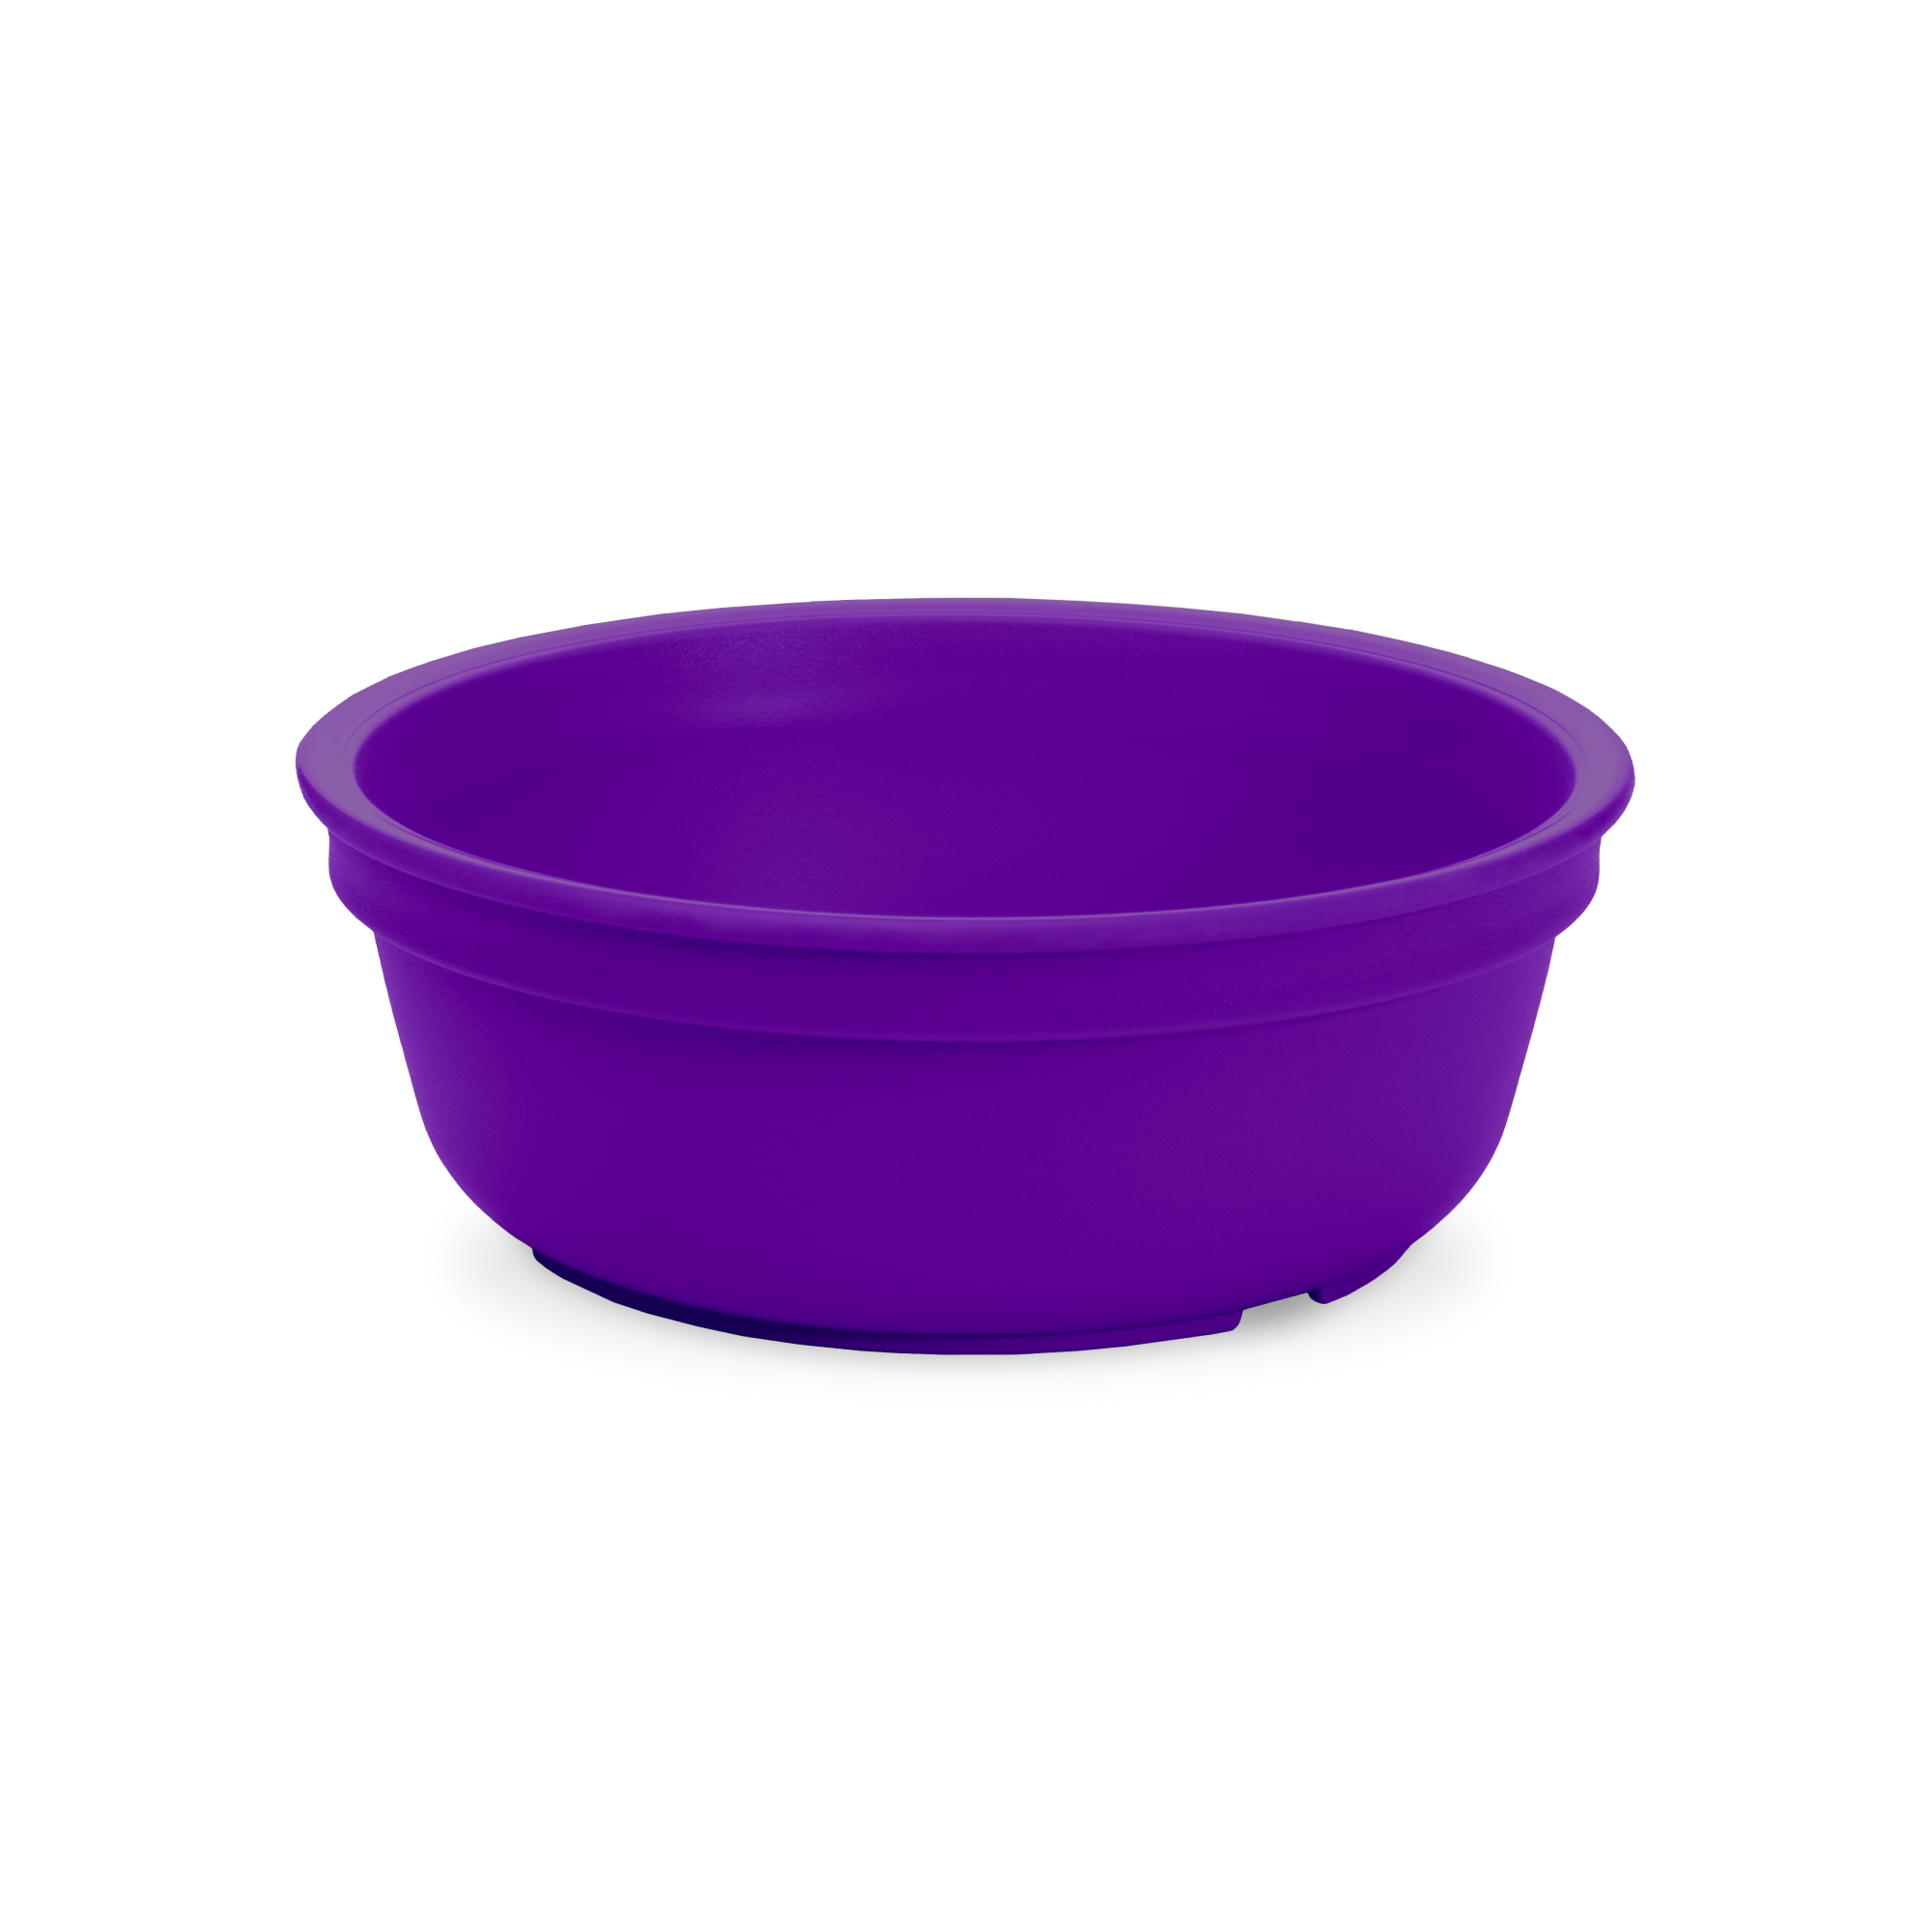 Re Play 3 Pack - 12 oz Stackable Bowls - Made from - Recycled Milk Jugs - Lime, Purple, Aqua - Mermaid